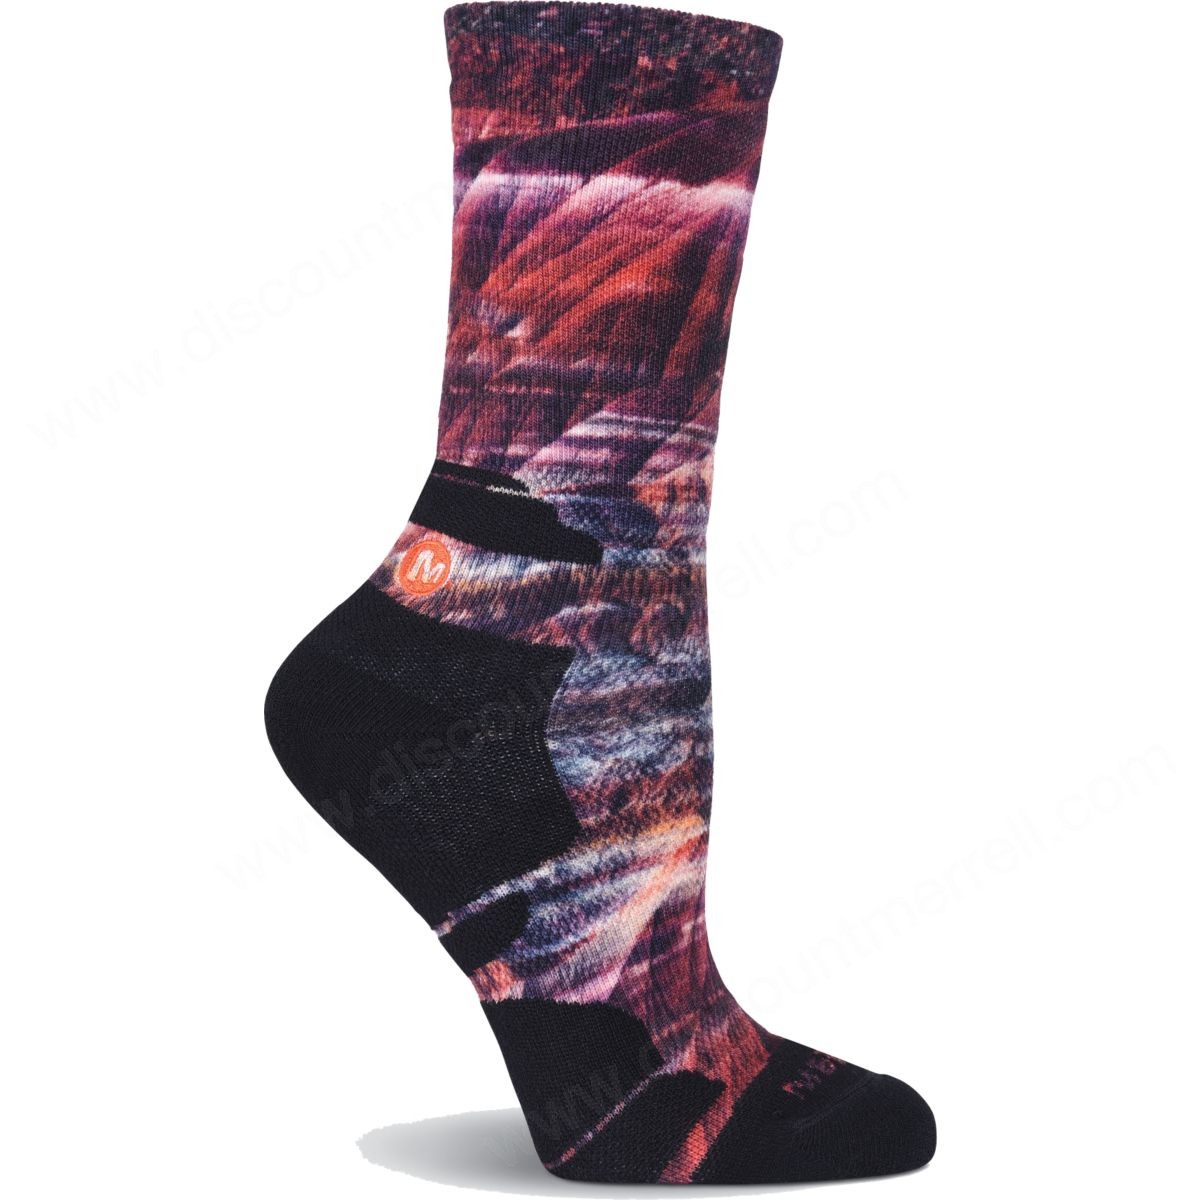 Merrell Women's Striation Printed Crew Sock Persion Red - Merrell Women's Striation Printed Crew Sock Persion Red